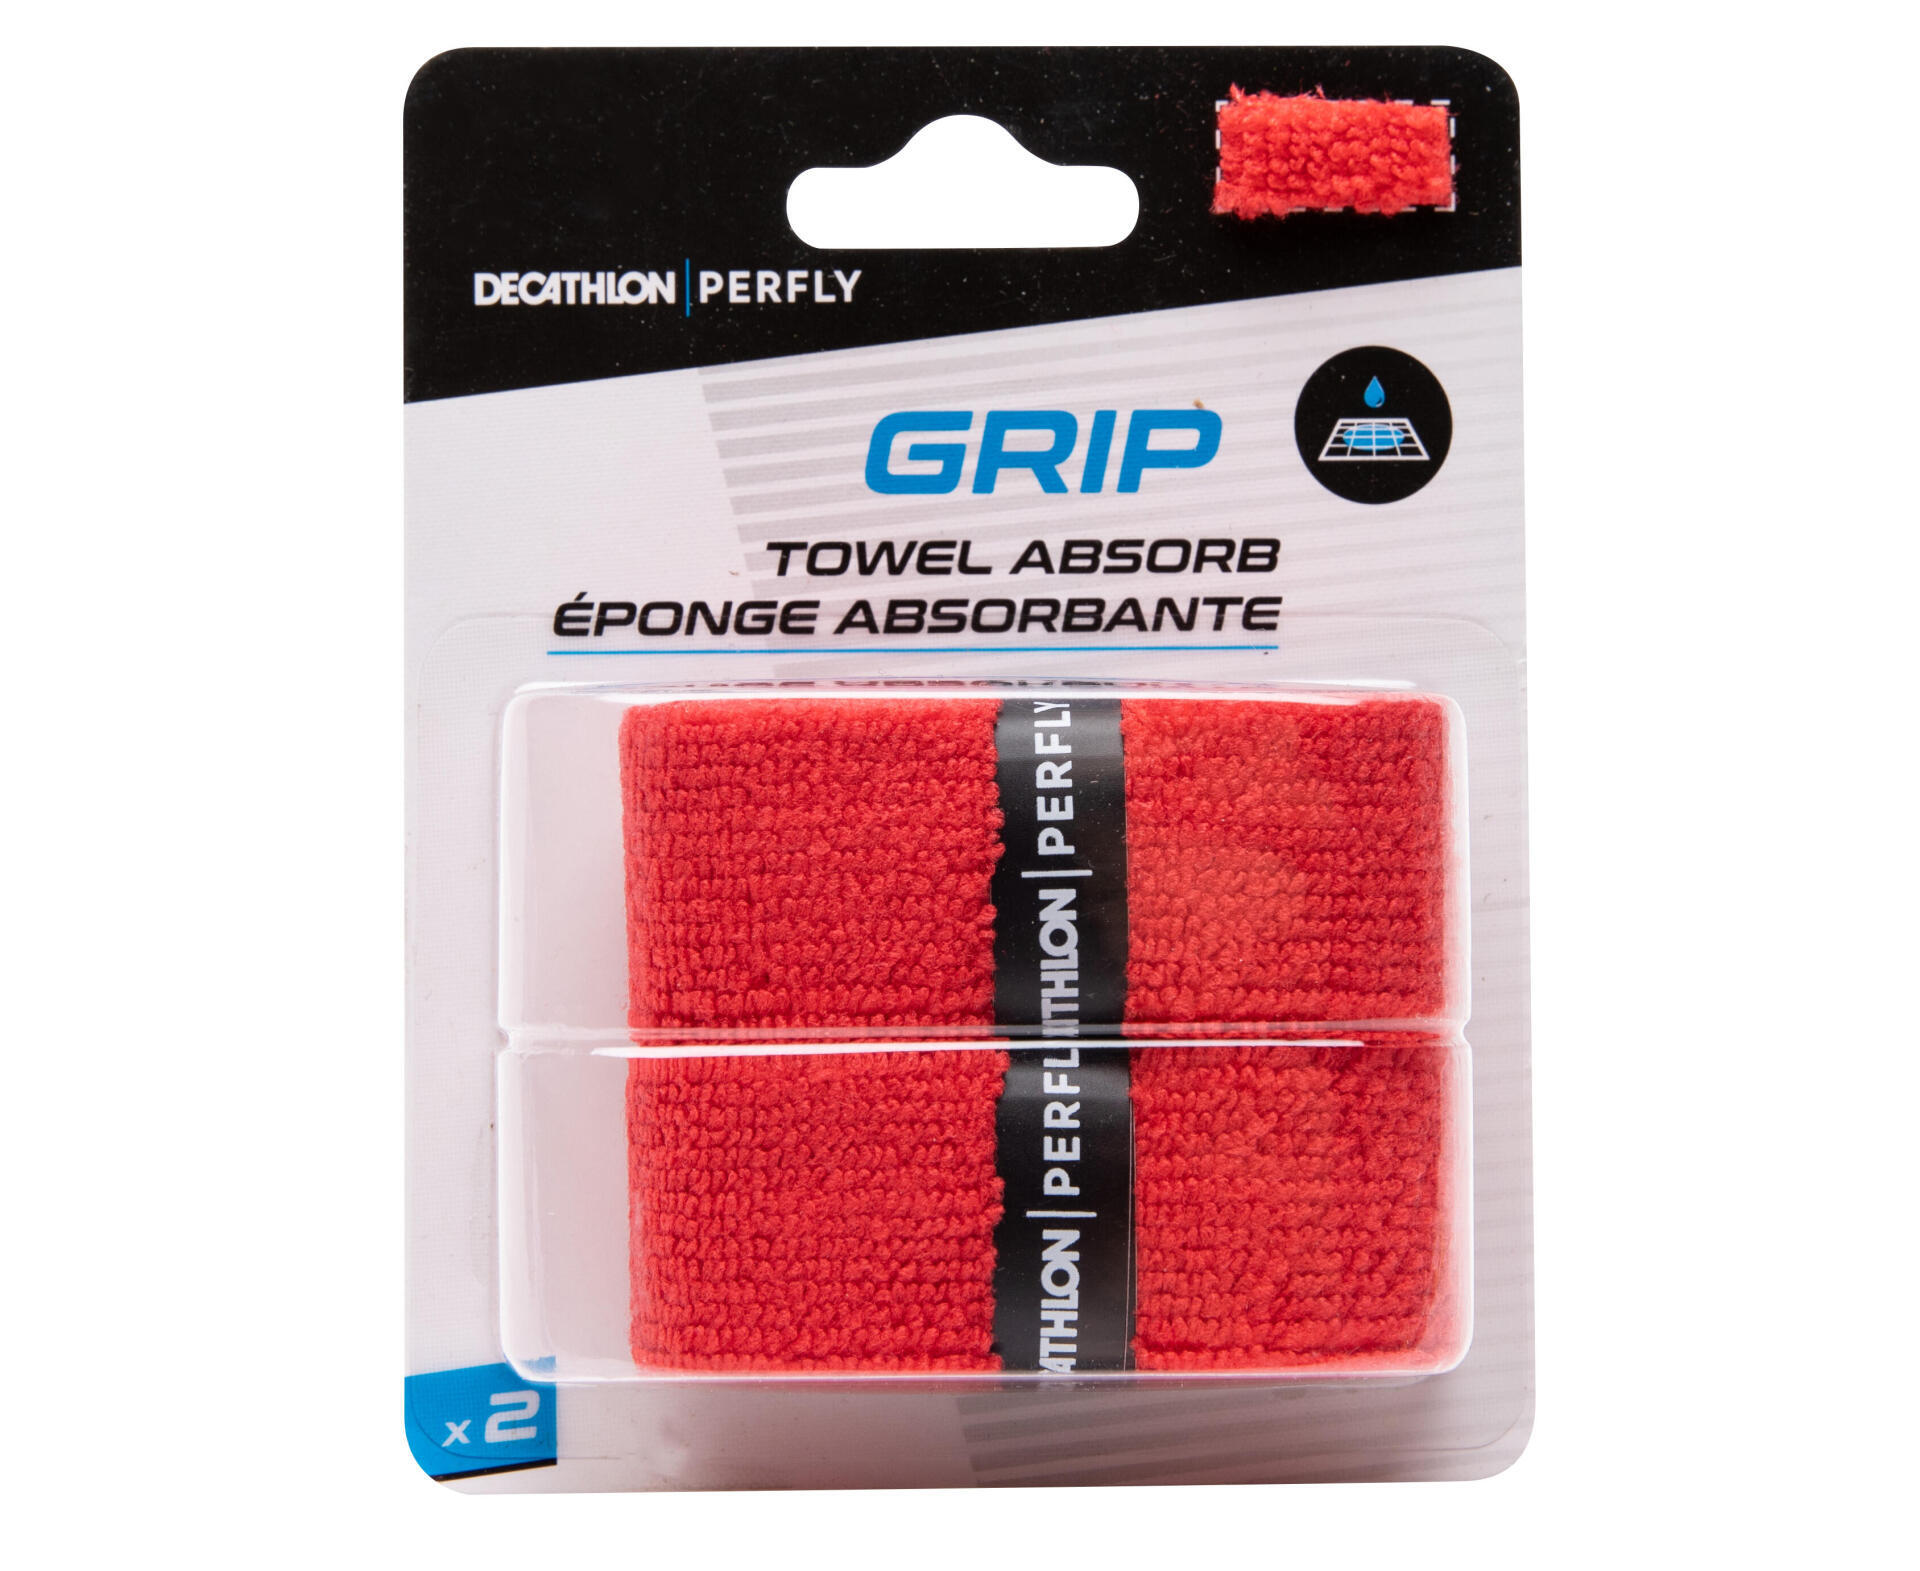 How To Choose Your Badminton Grip Or Overgrip?